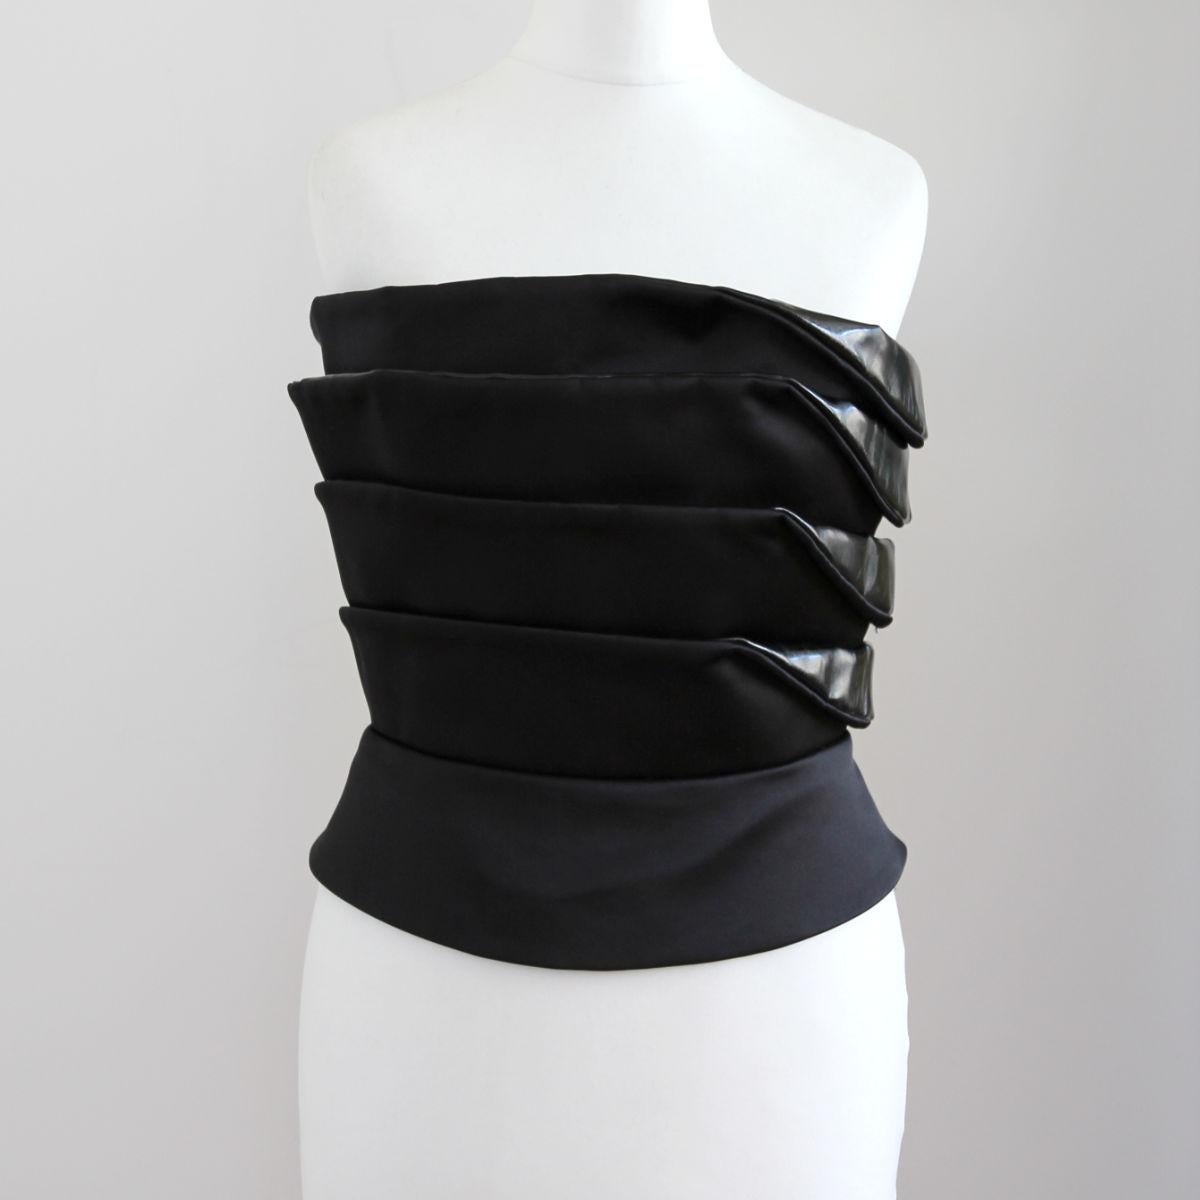 Women's EMPORIO ARMANI 2010 Elegant Black Top / Bustier / Corsage with patent inserts 